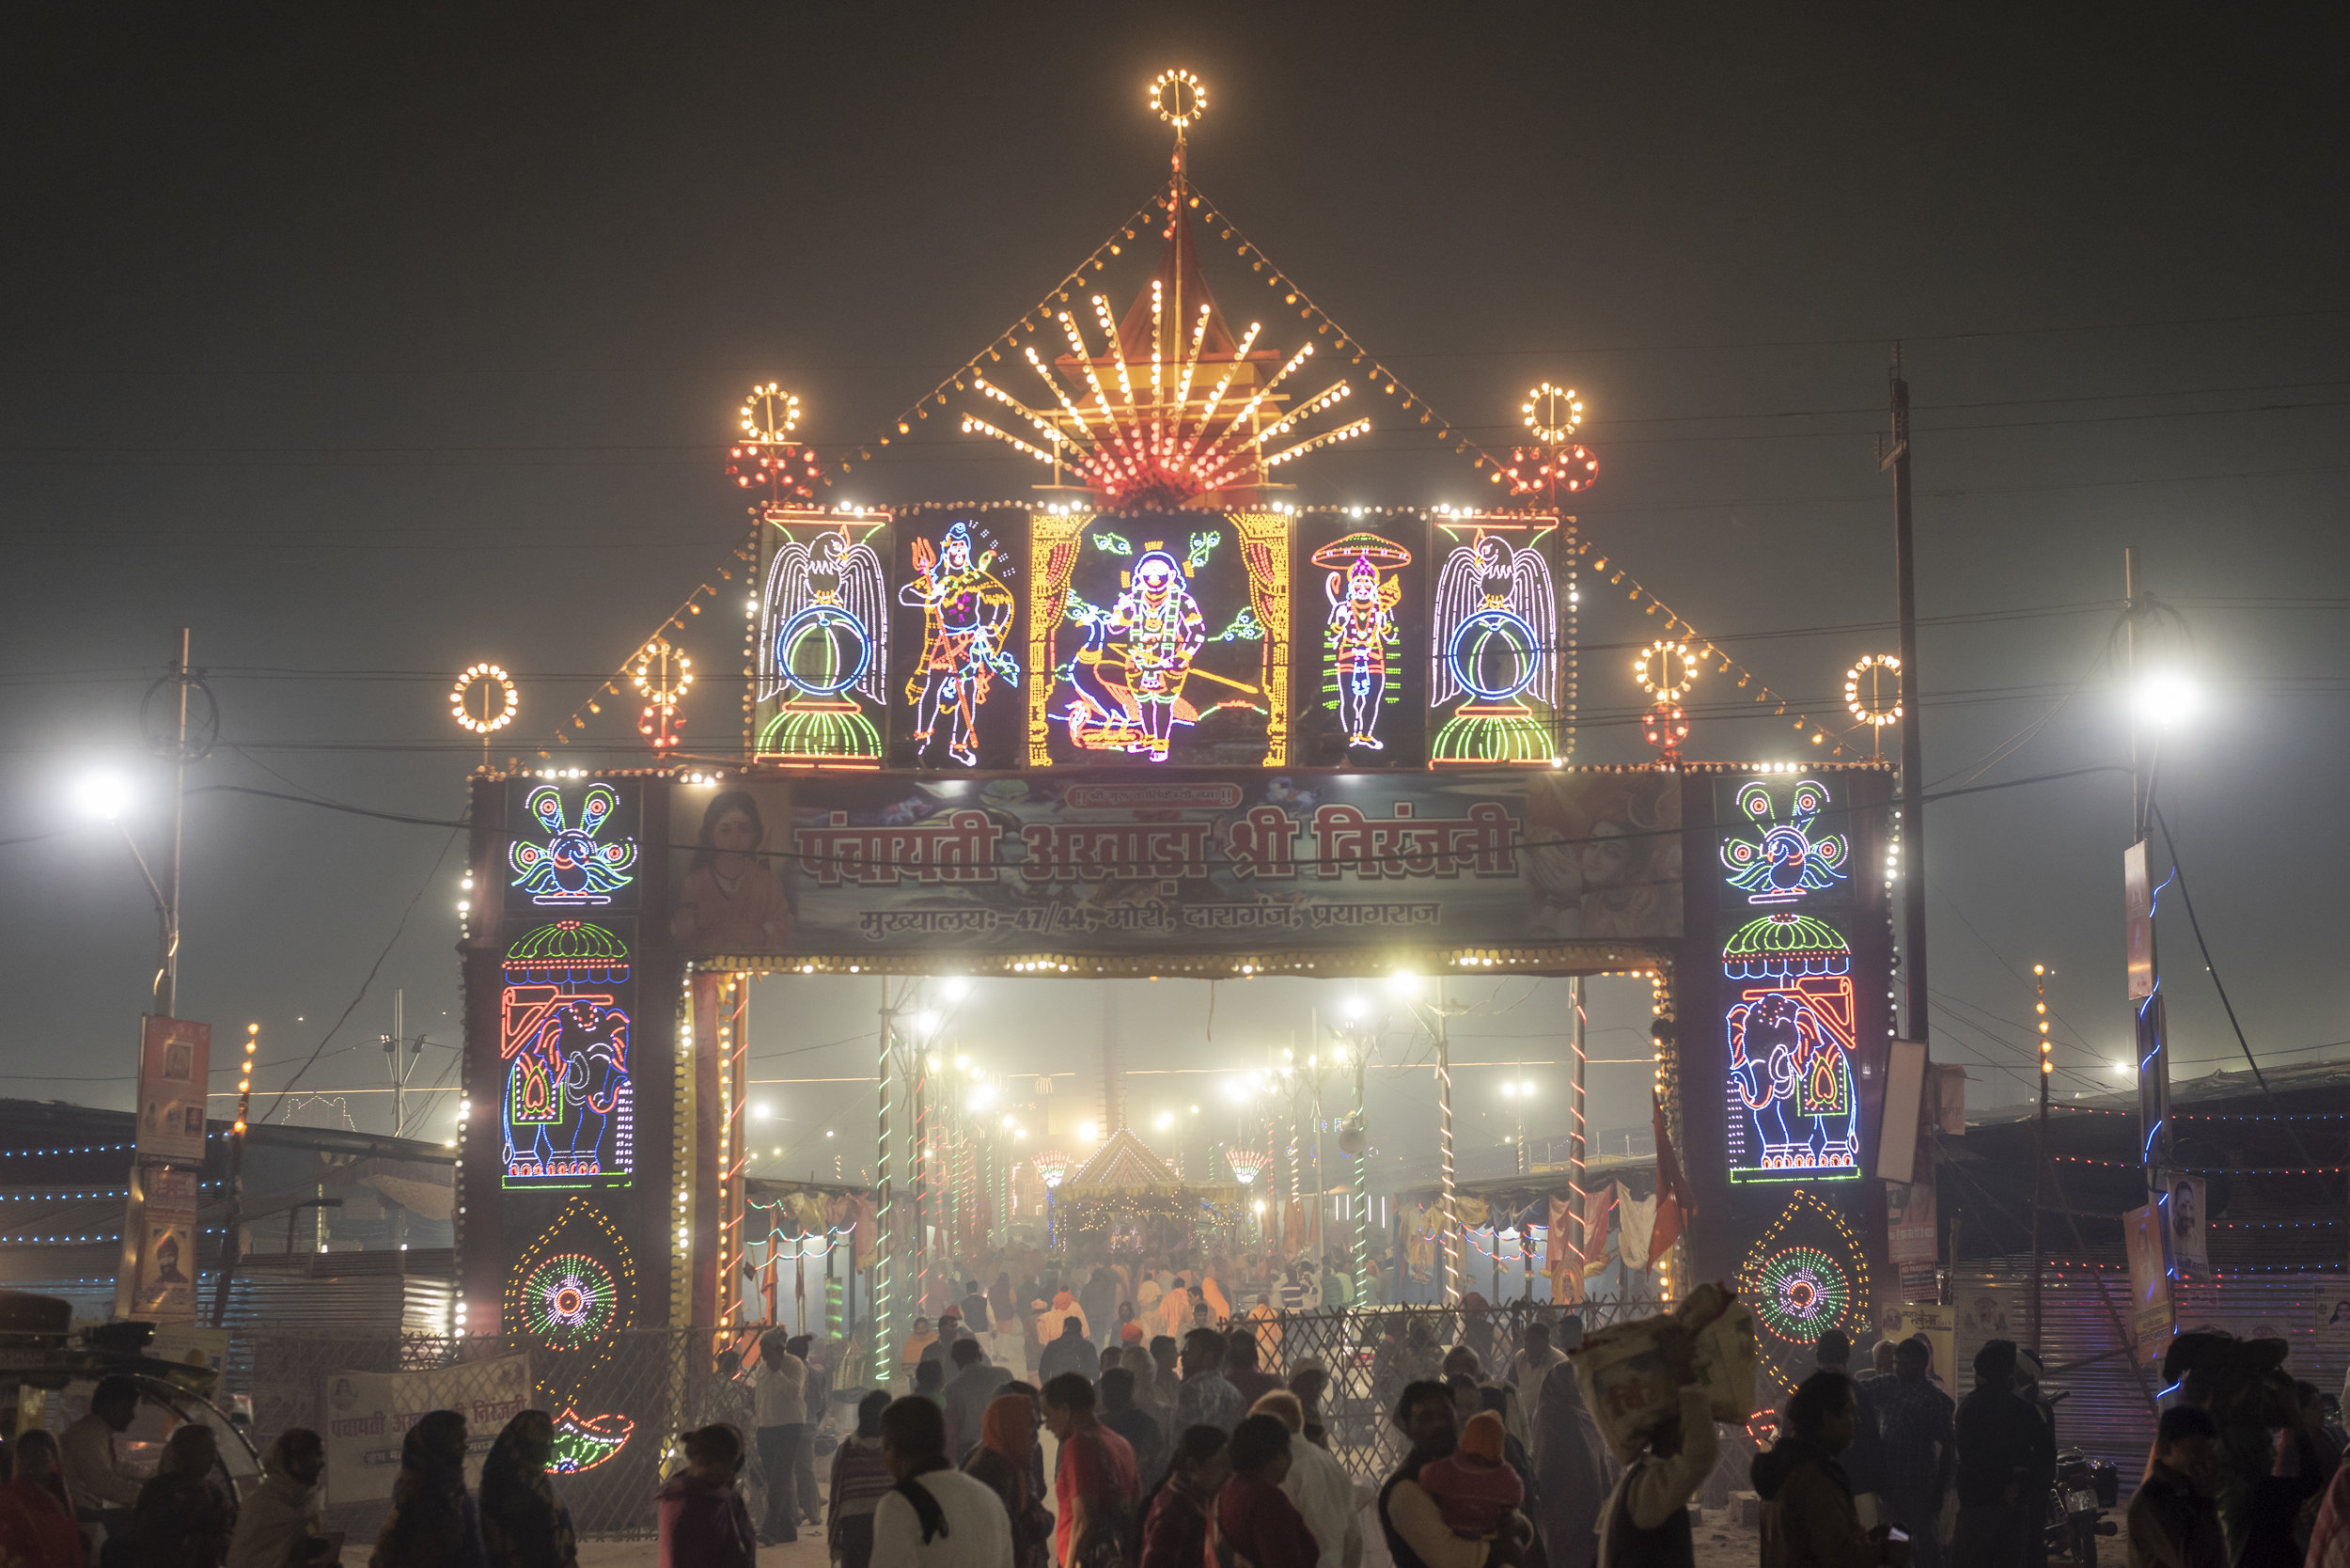  Spectacularly lit entrance to central Mela area 